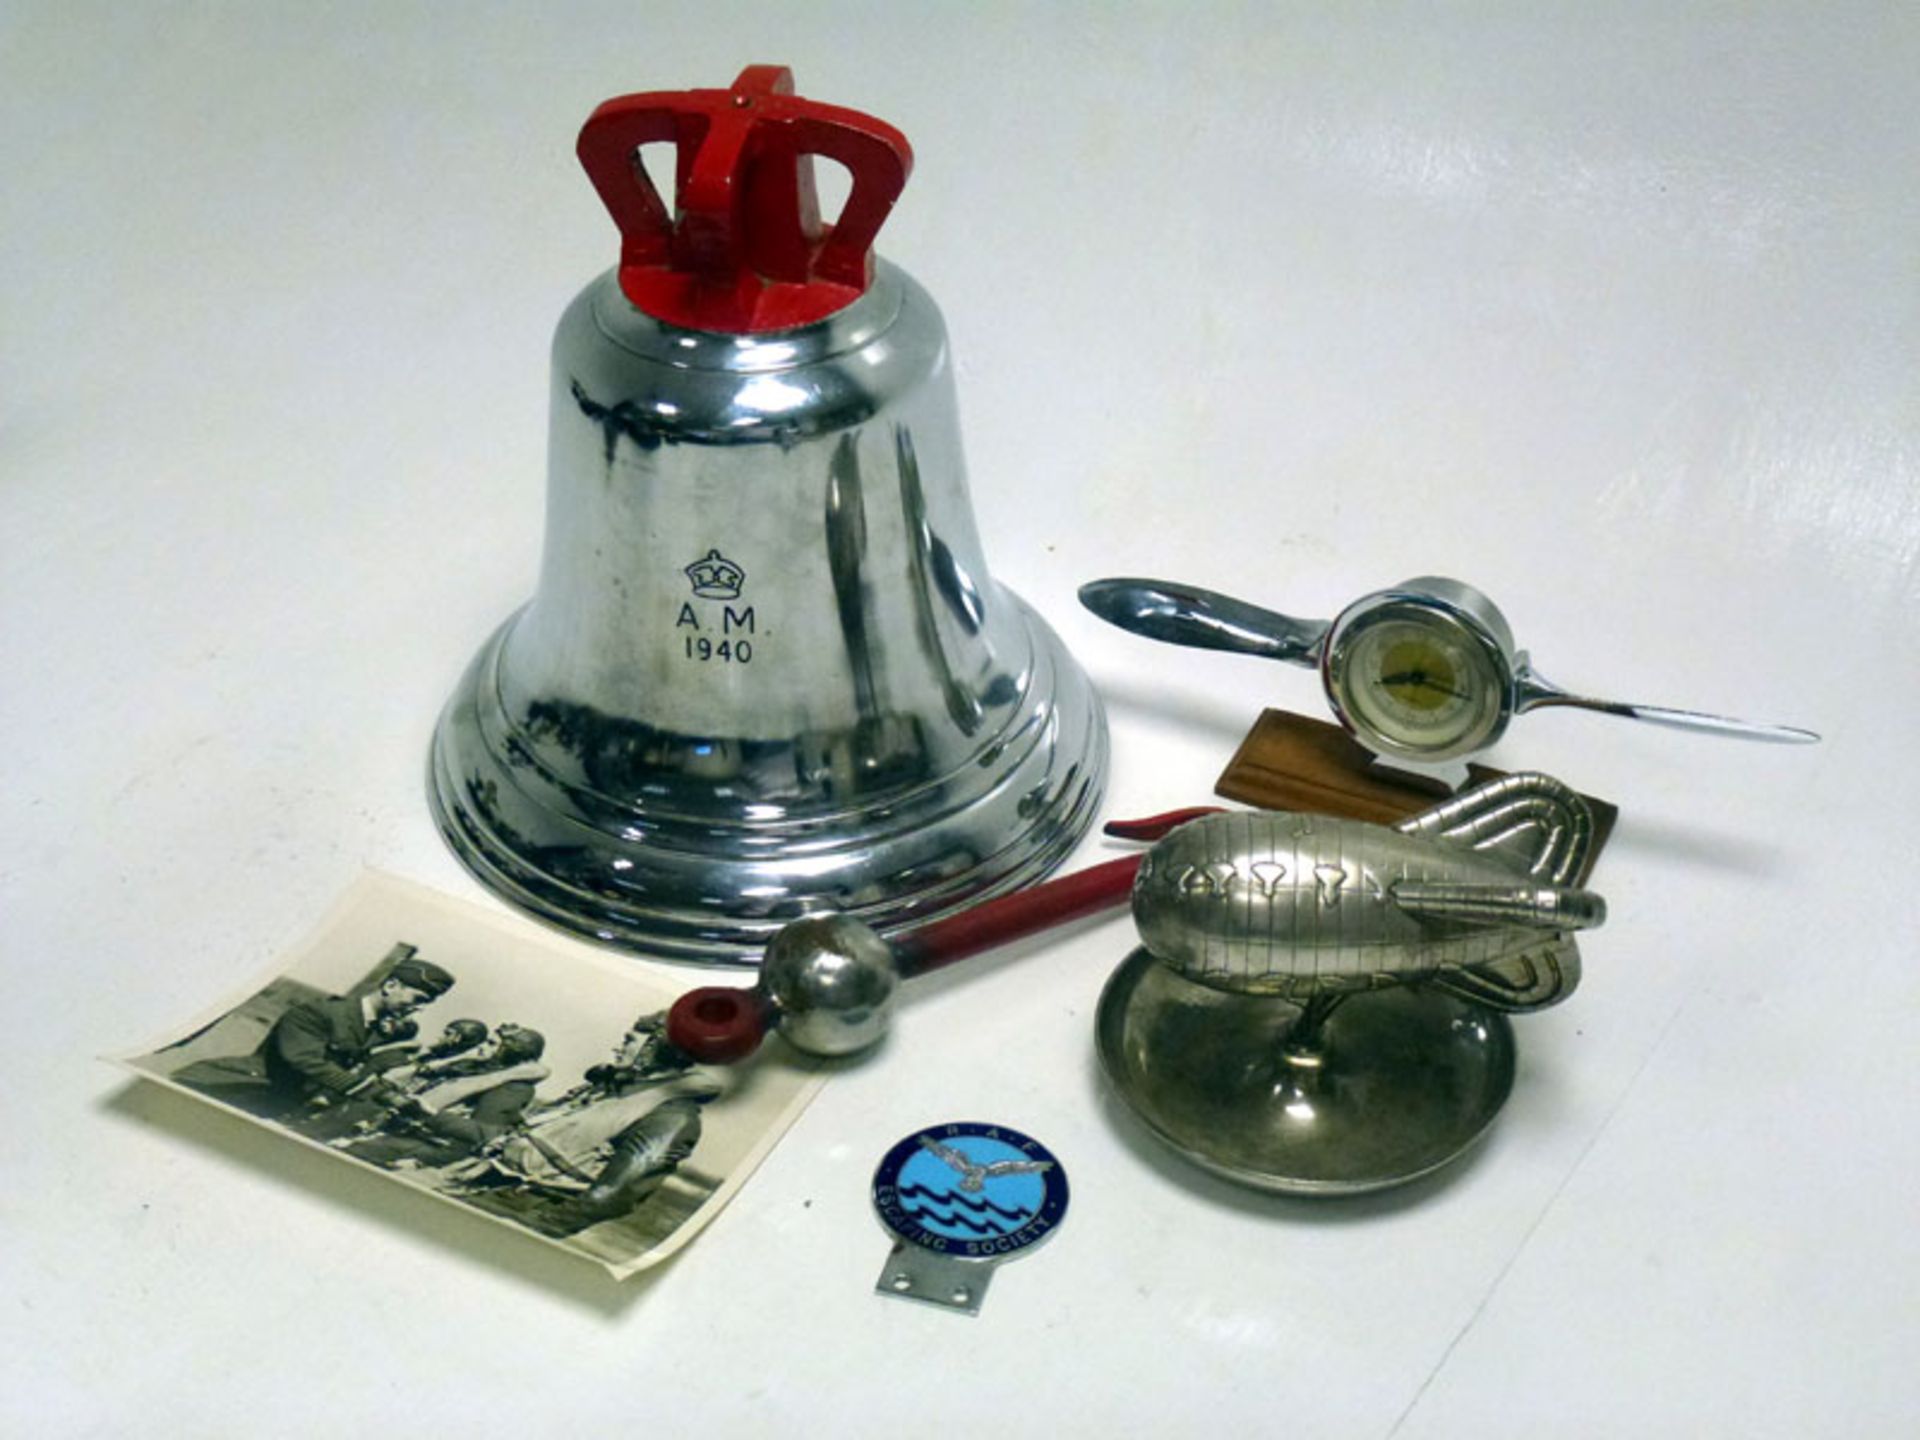 To include -
1. An RAF 'Scramble Bell', with crown, dated 1940. The Bell is Ministry of Defence, 11